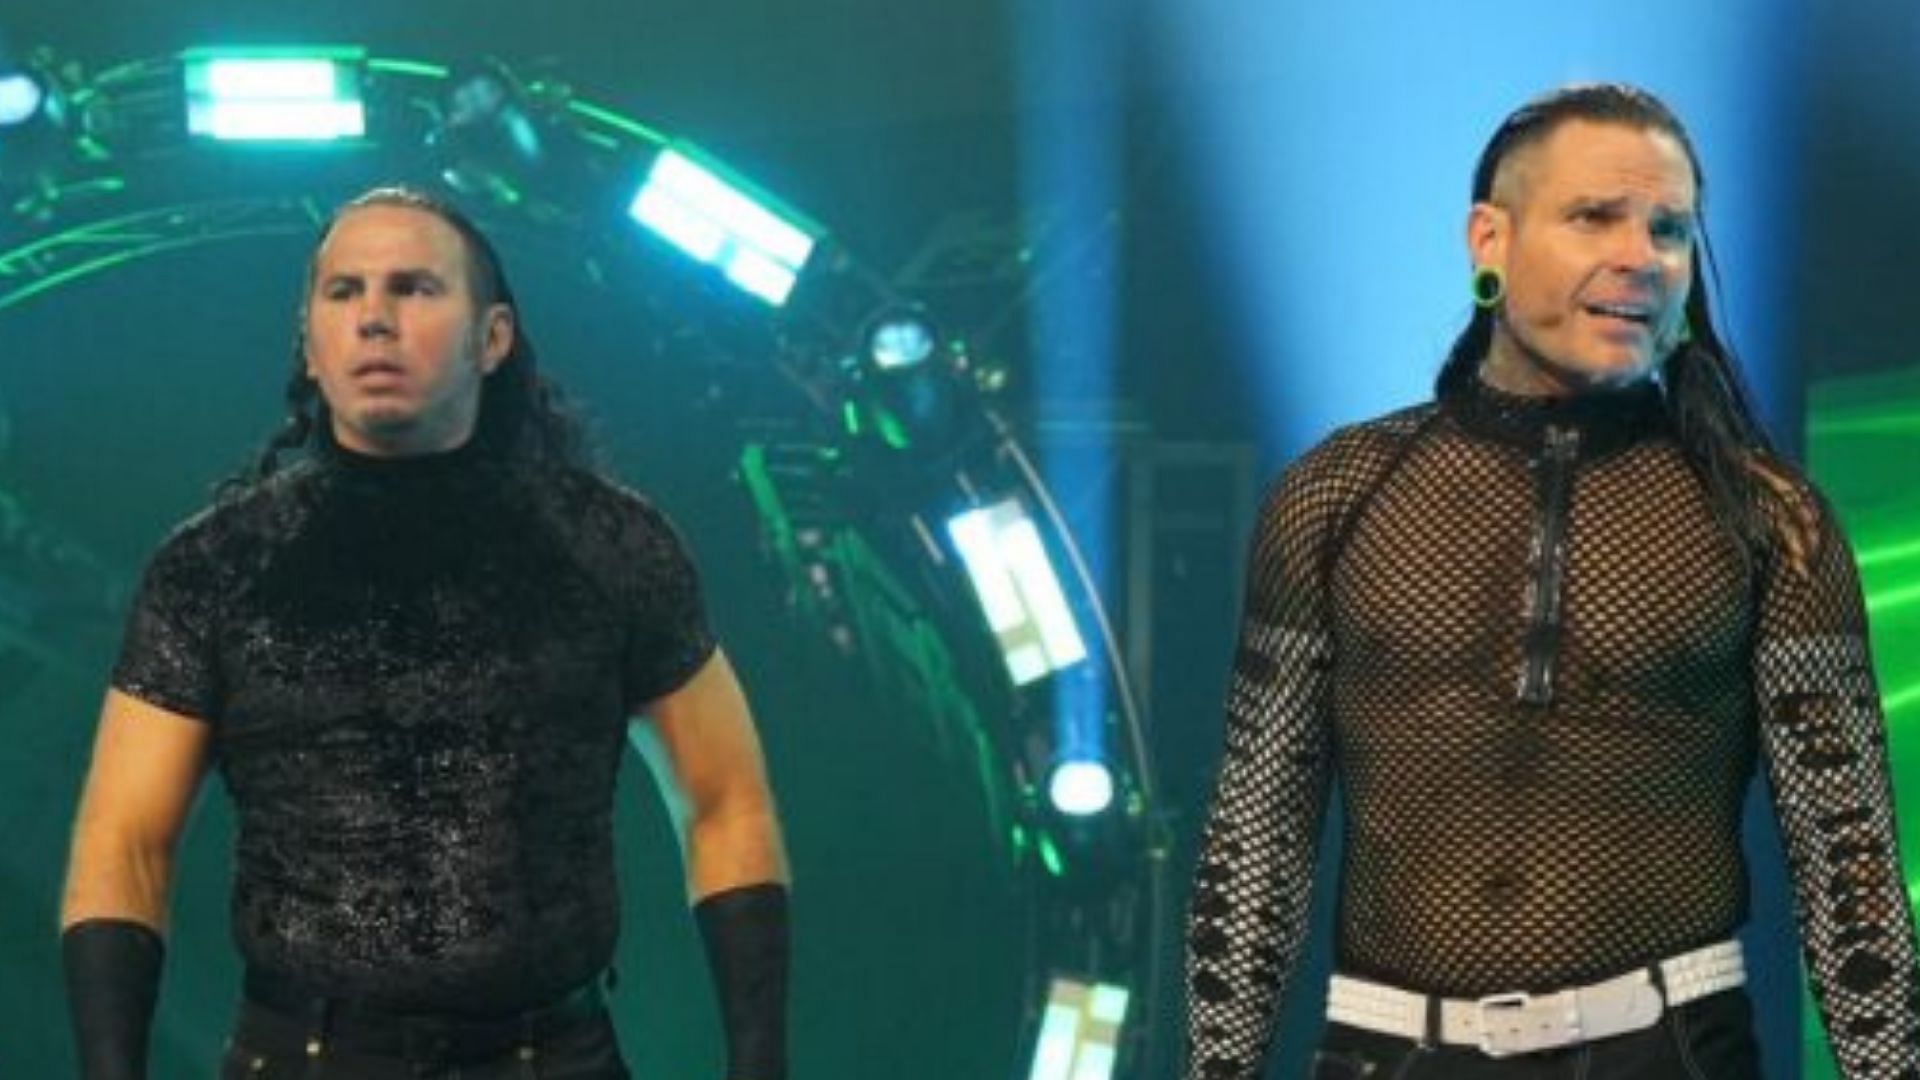 The Hardy Boyz at an AEW event in 2022!